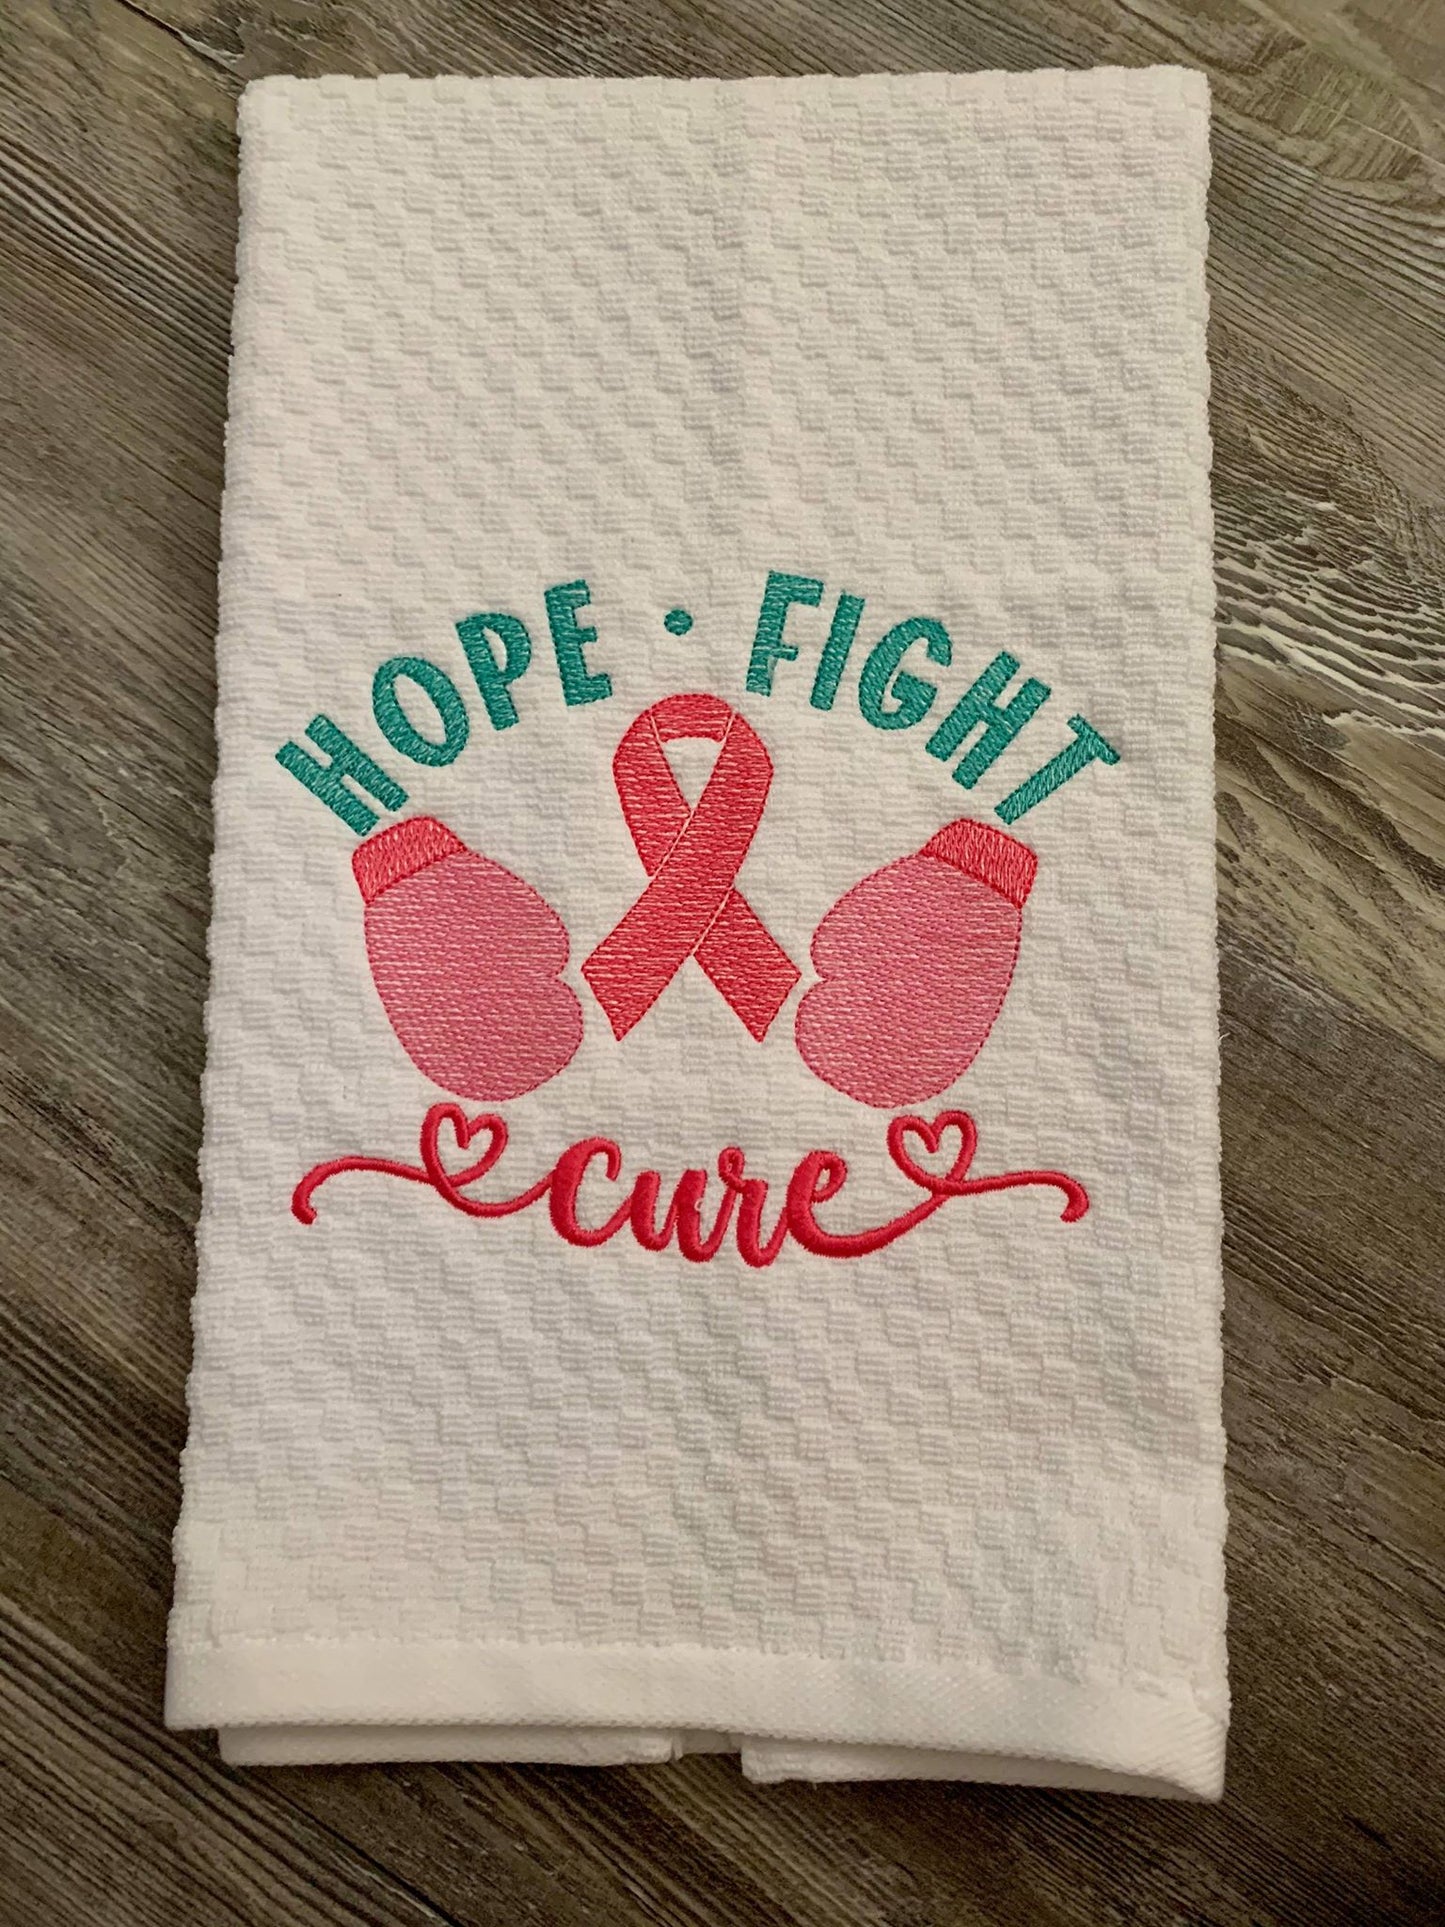 Hope Fight Cure - 2 Sizes - Digital Embroidery Design